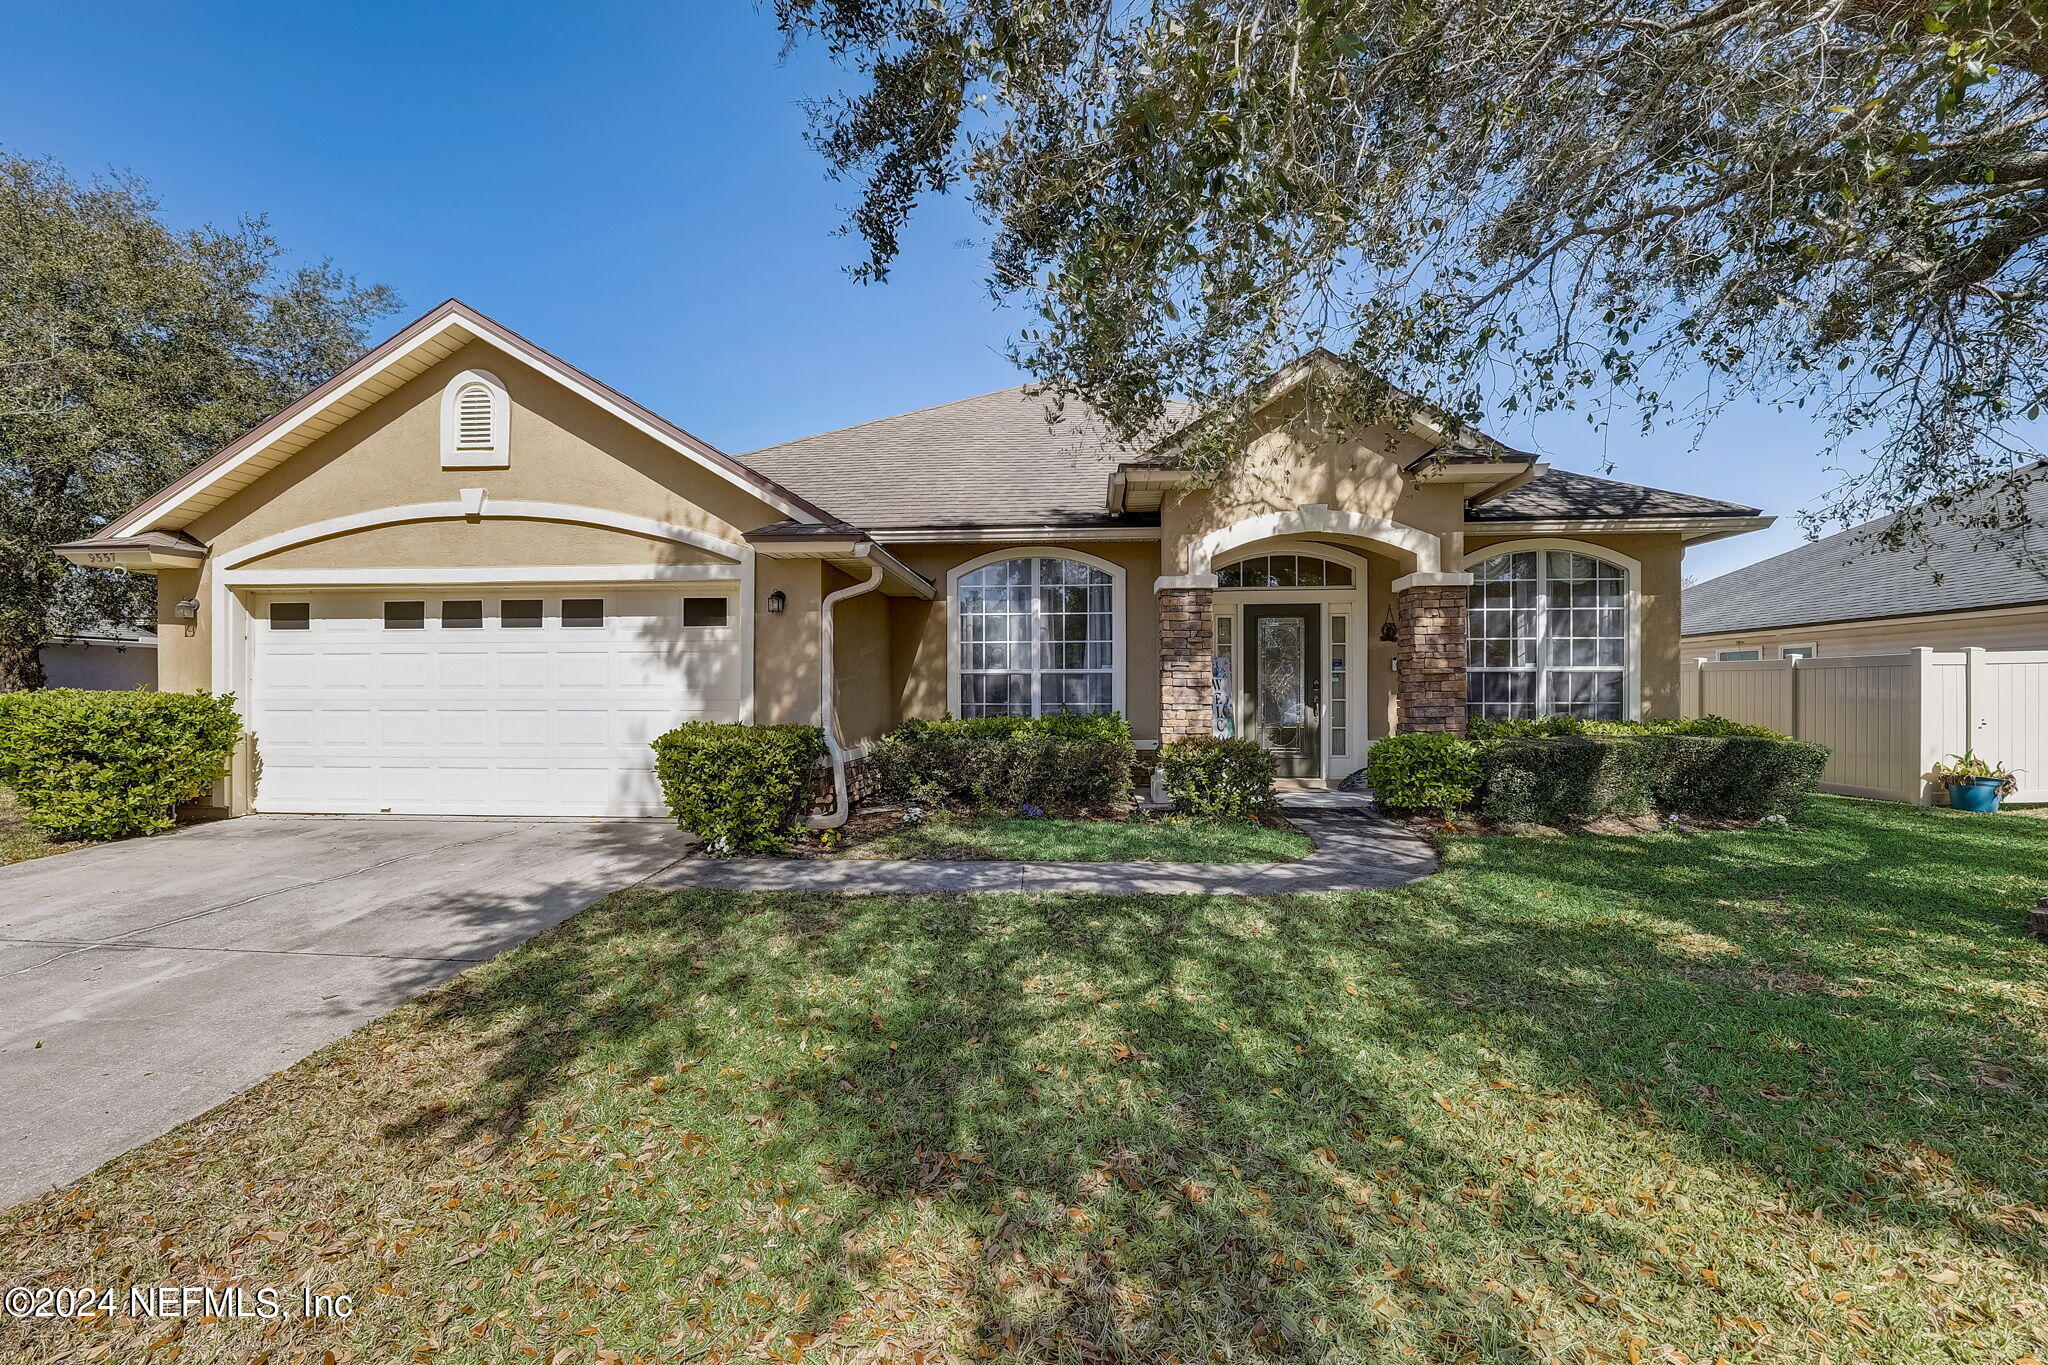 Jacksonville, FL home for sale located at 9557 ADELAIDE Drive, Jacksonville, FL 32244